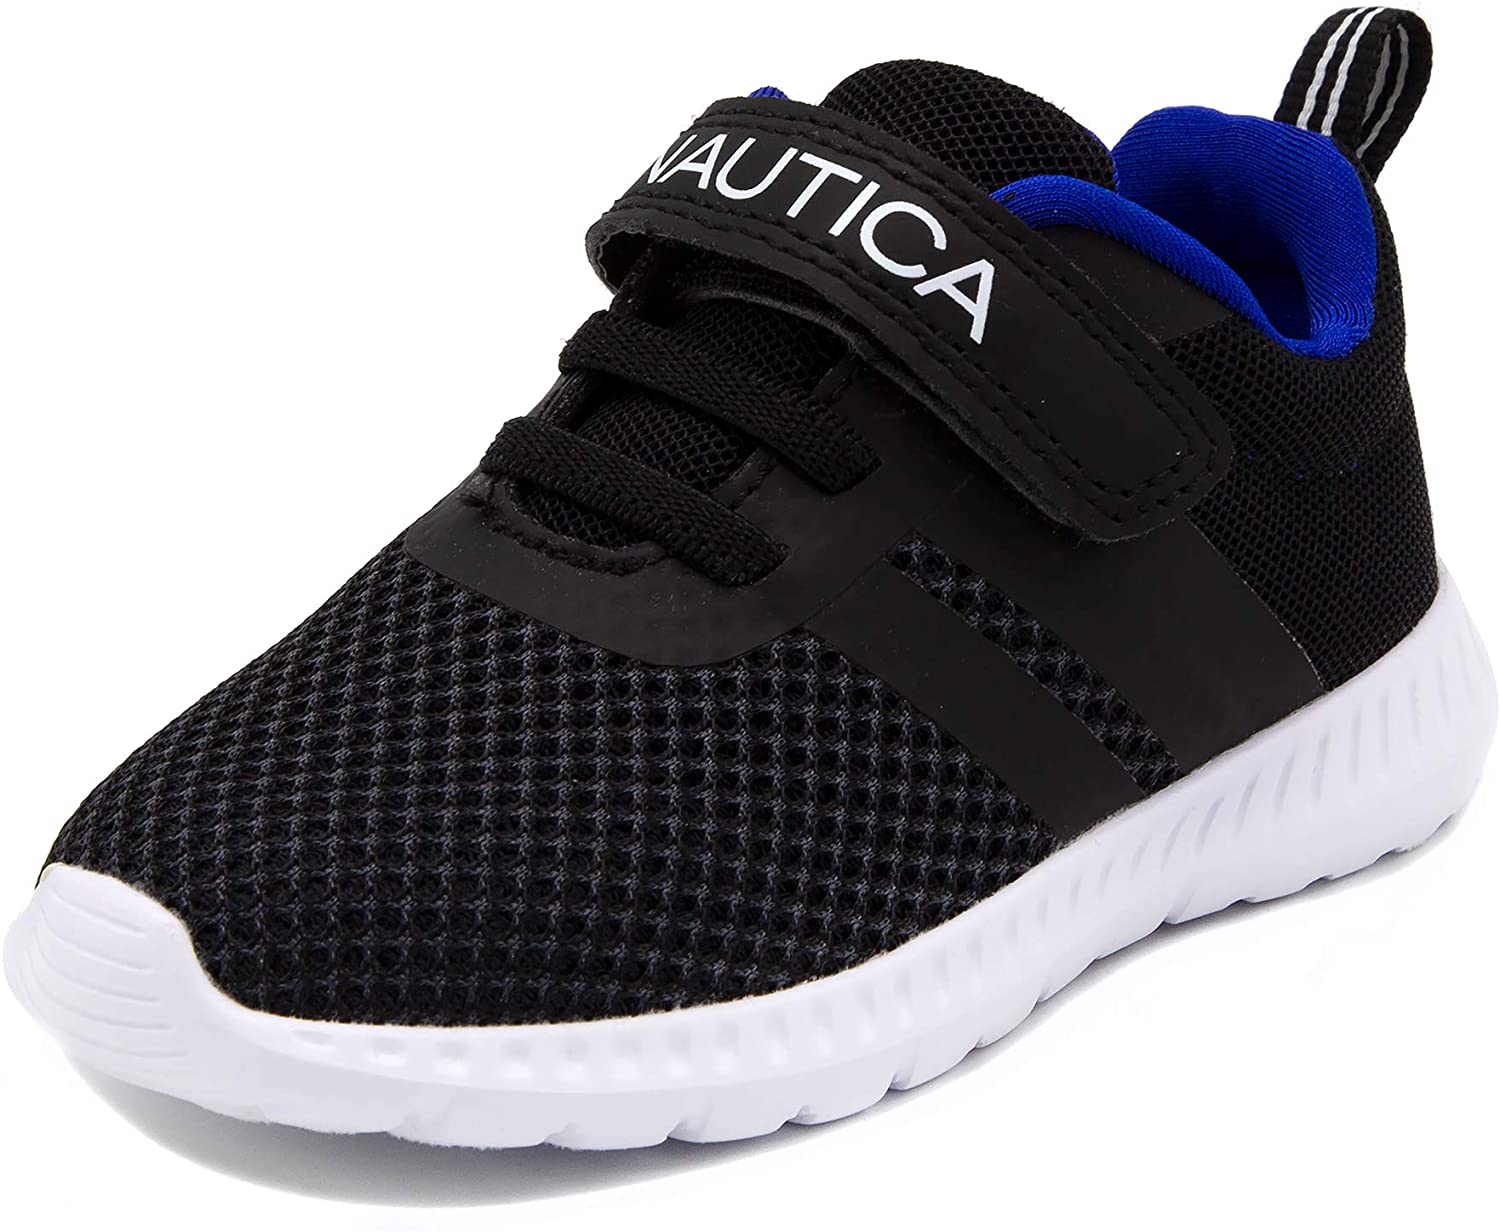 Nautica Kids Fashion Sneaker Athletic Running Shoe with One Strap|Boys-Girls| Toddler/Little Kid 